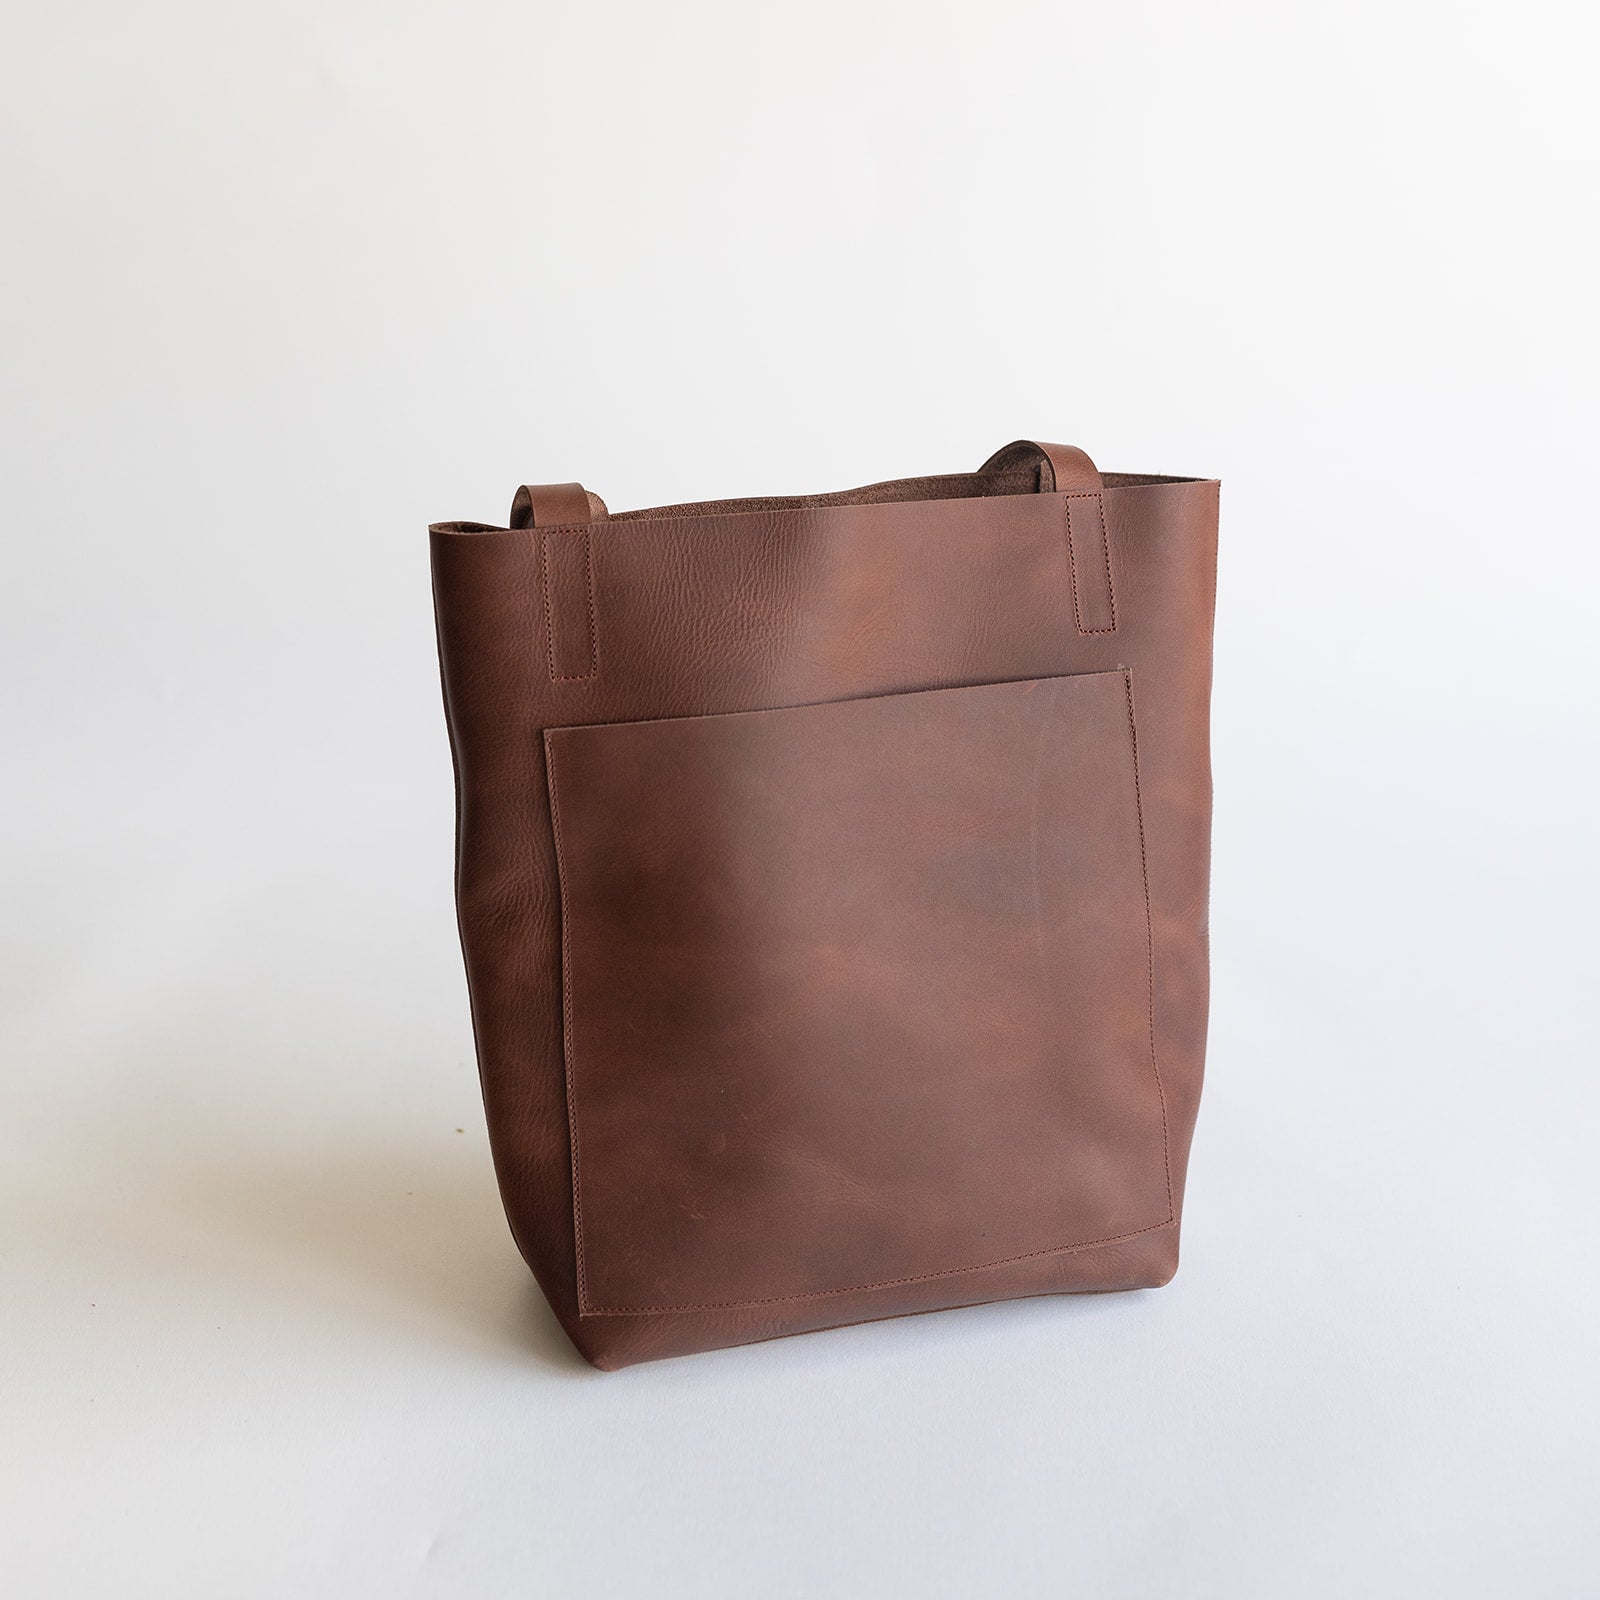 Adelisa & Co dark brown  leather tote for children and women.